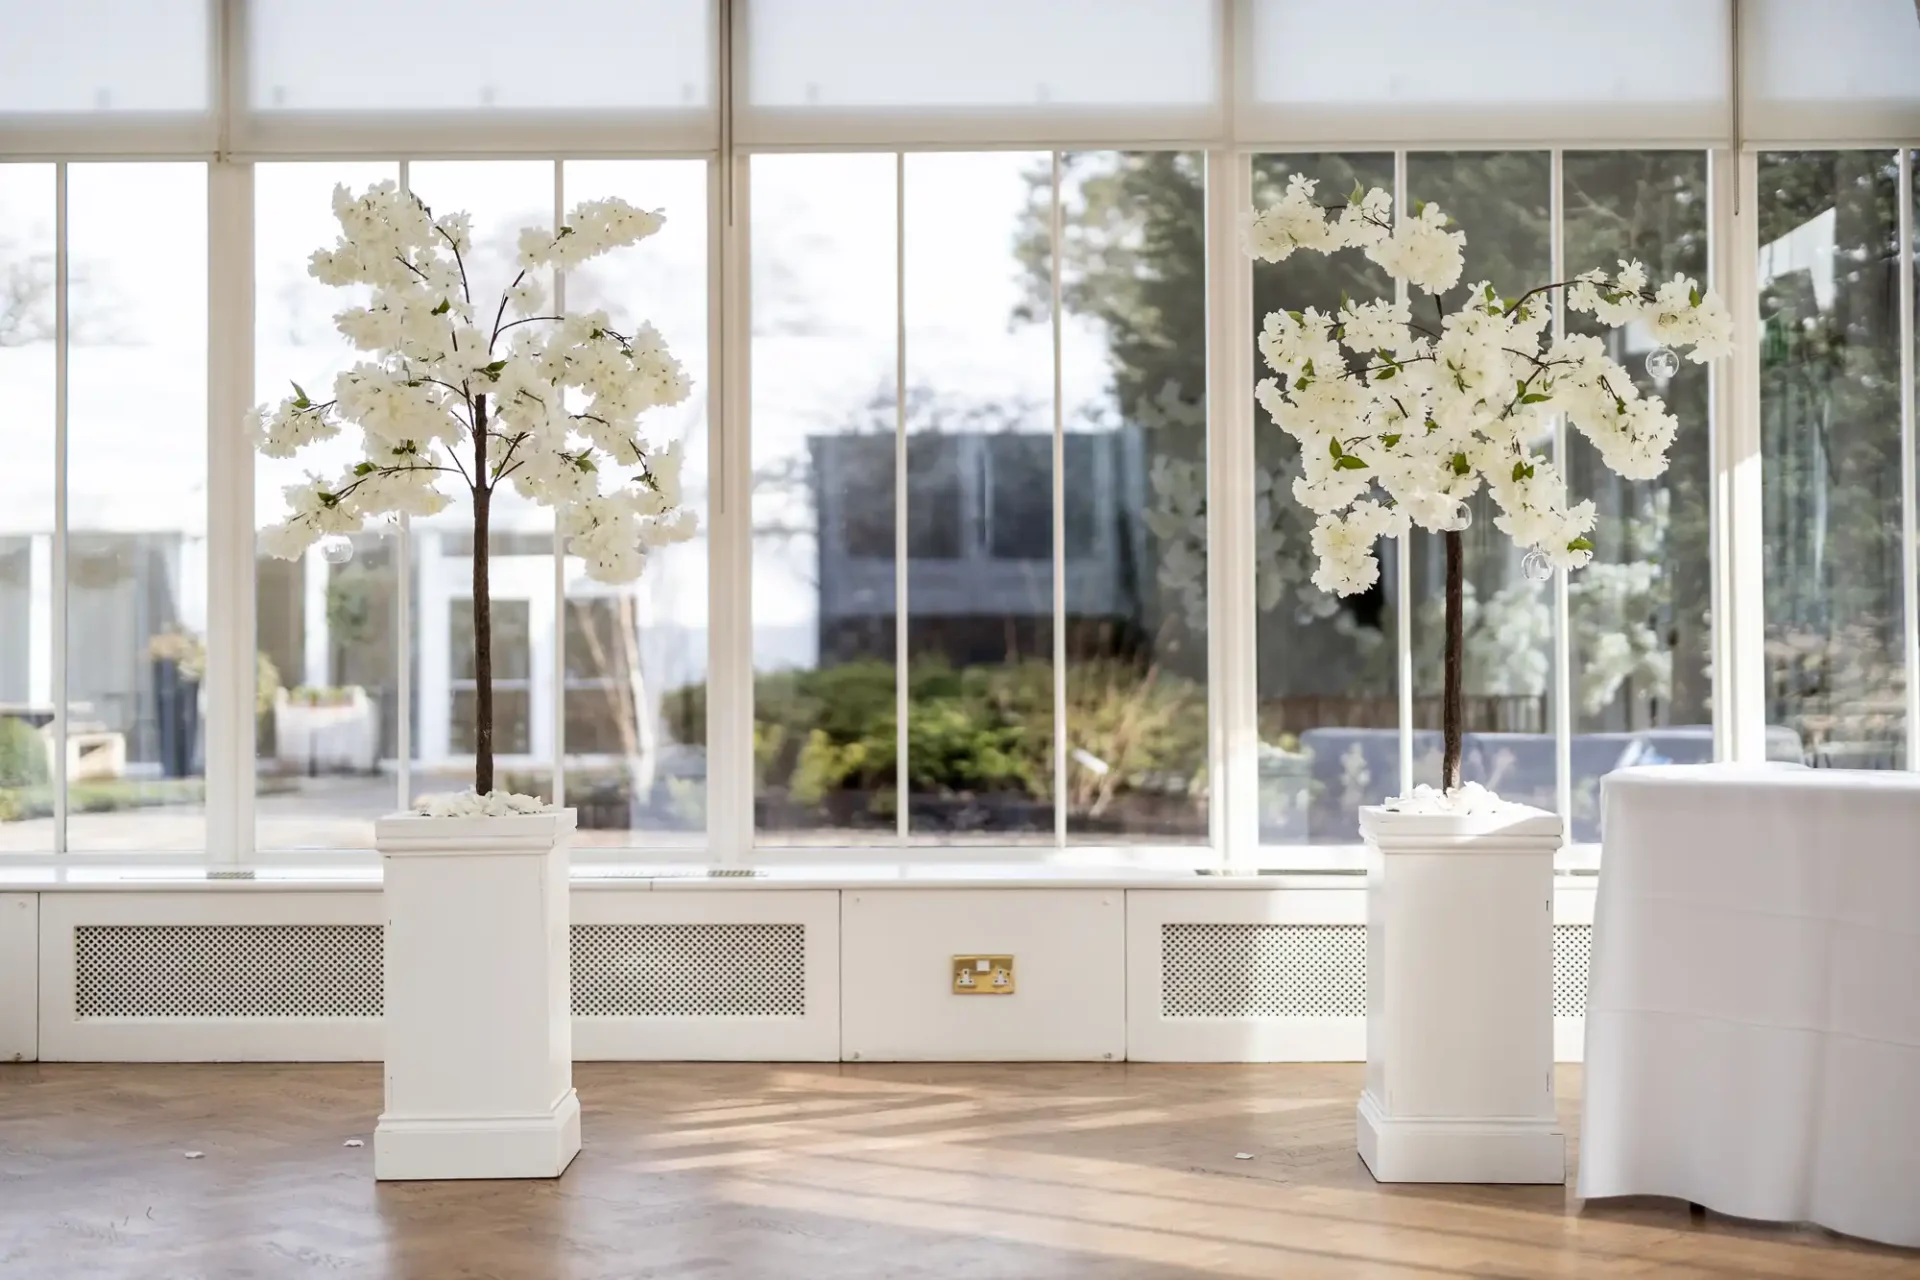 Two white floral arrangements on pedestals in a bright room with large windows overlooking a garden.